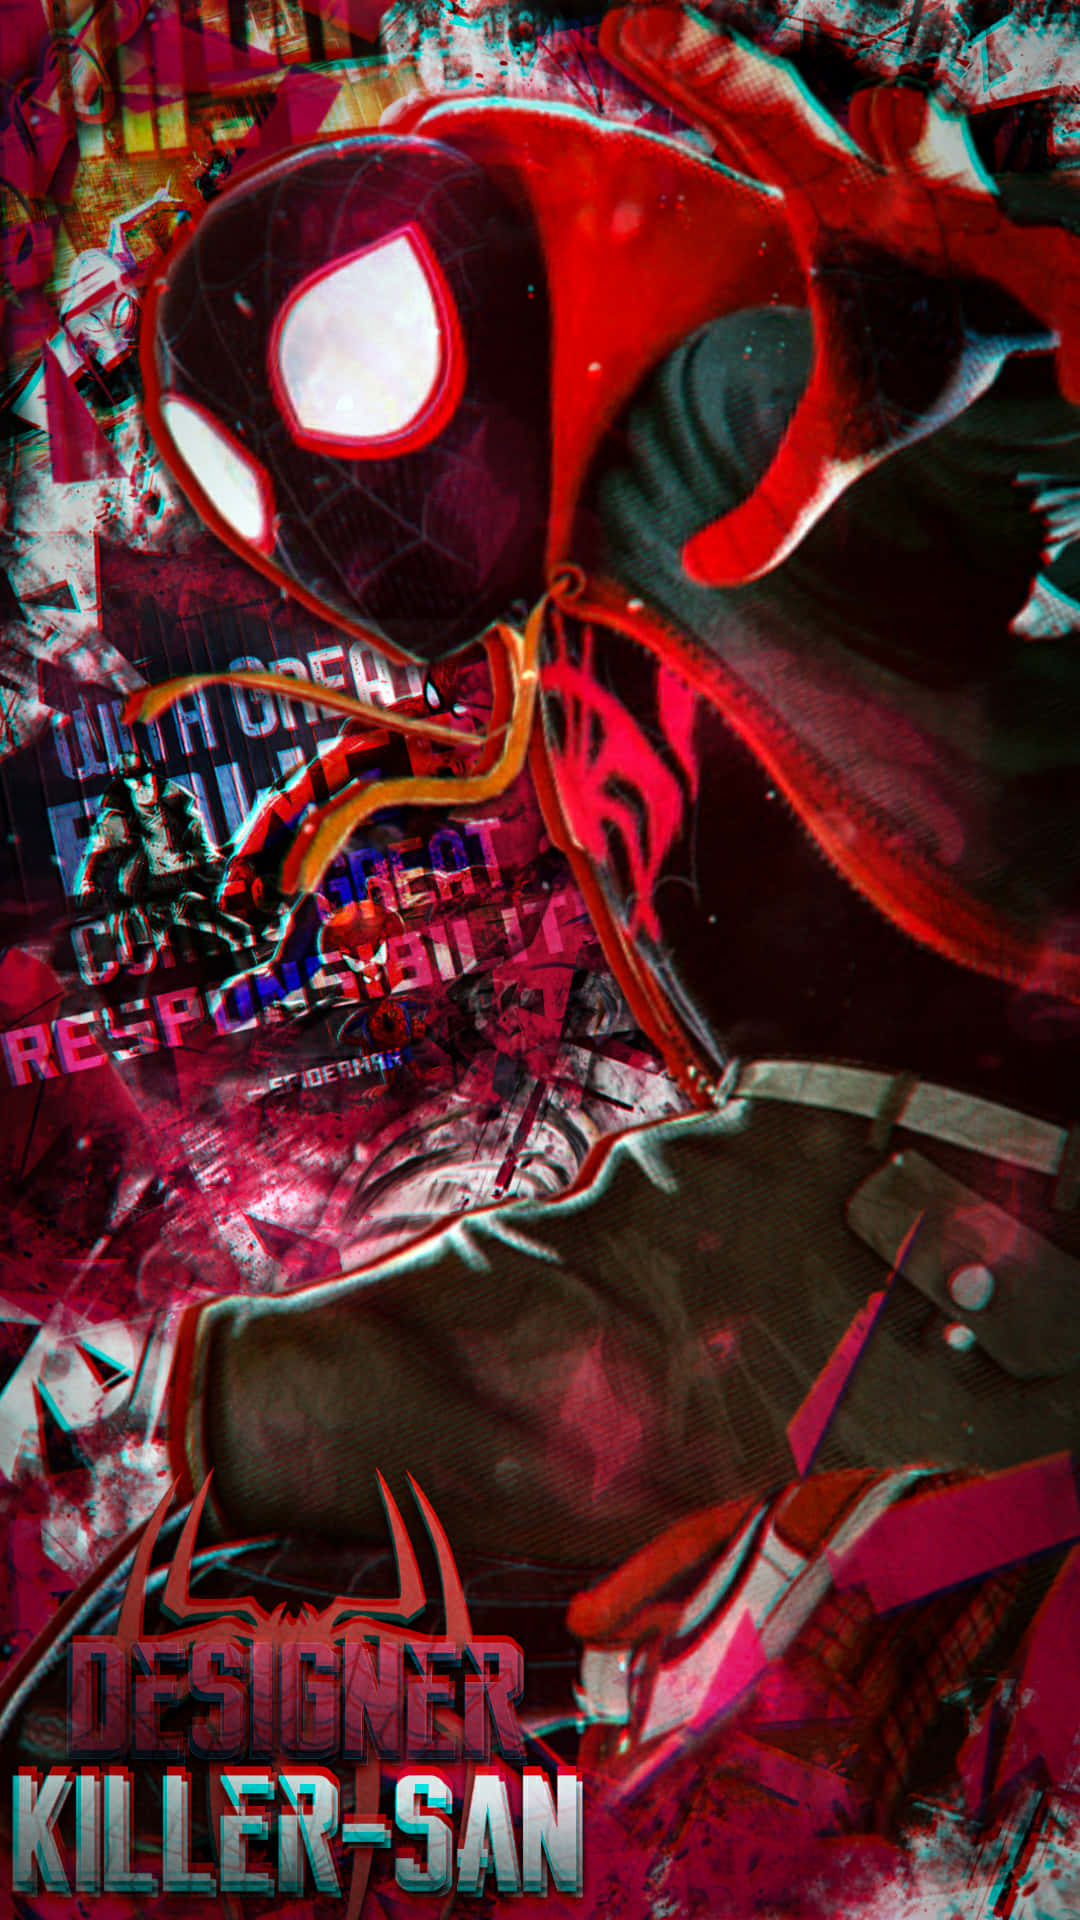 Miles Morales, Spider-Man Beyond the Mask